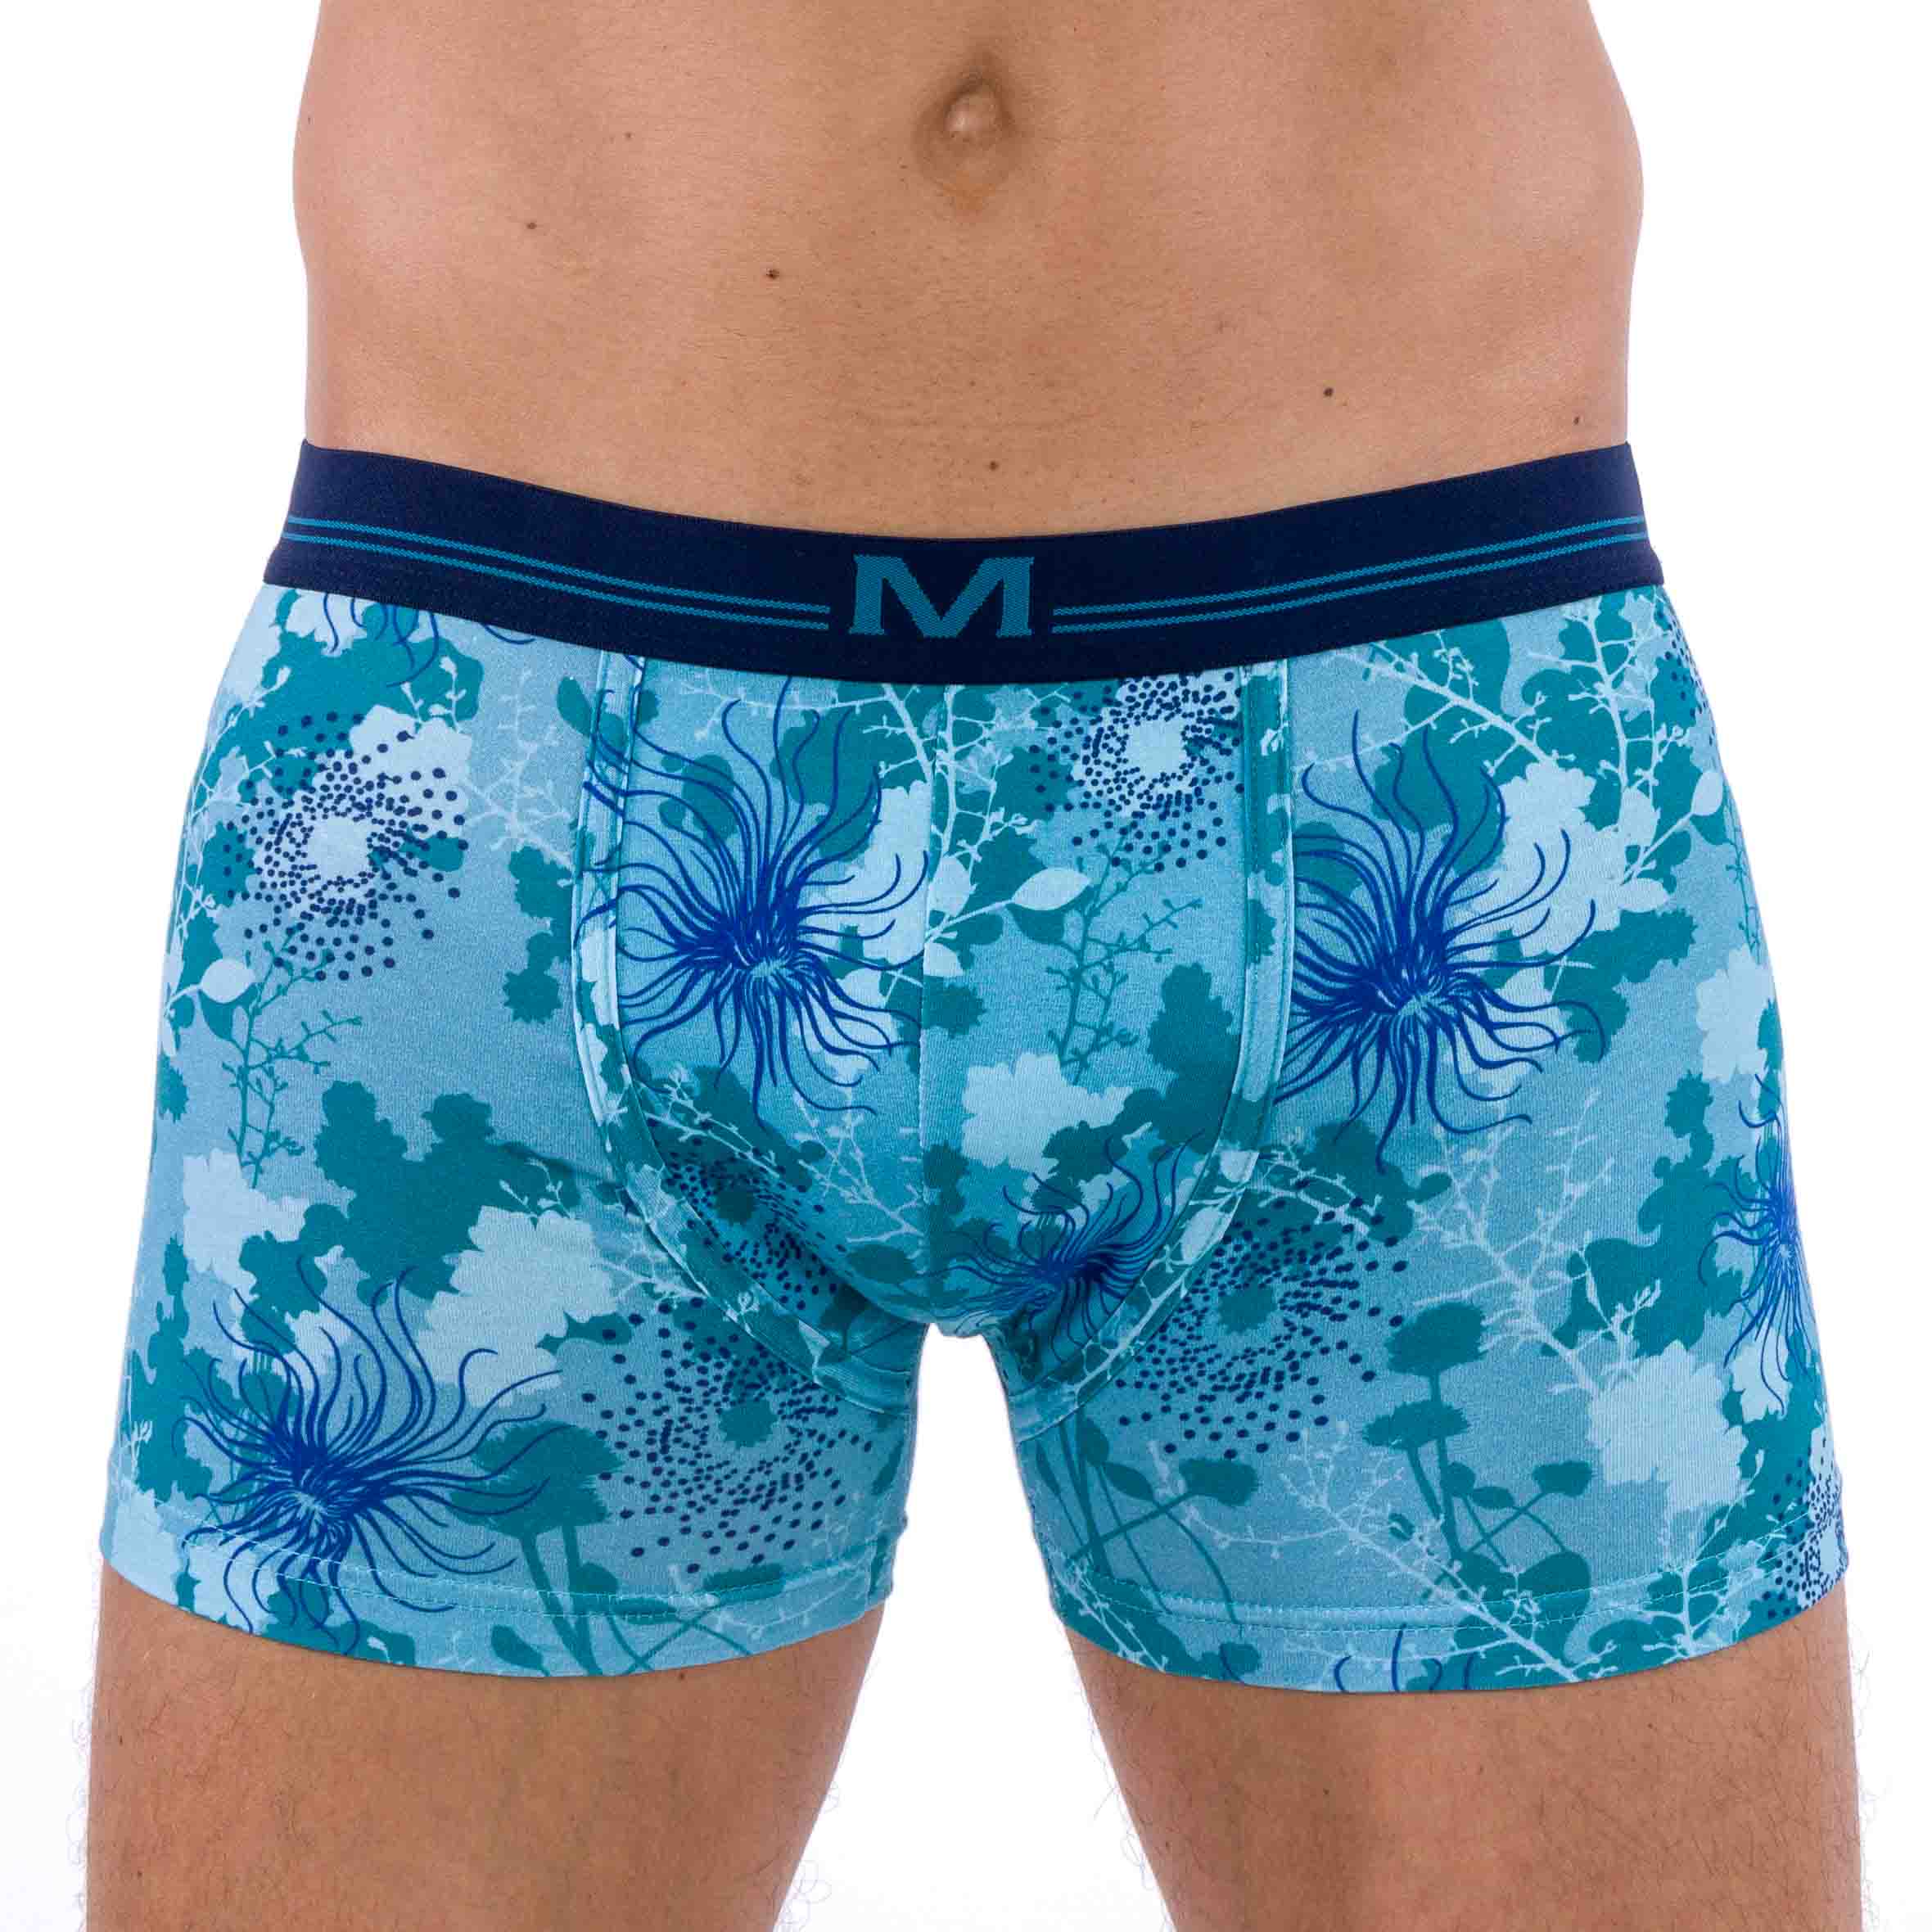 Pack of 2 Shorties in ORGANIC Stretch Cotton NAVY and LAGOON printed